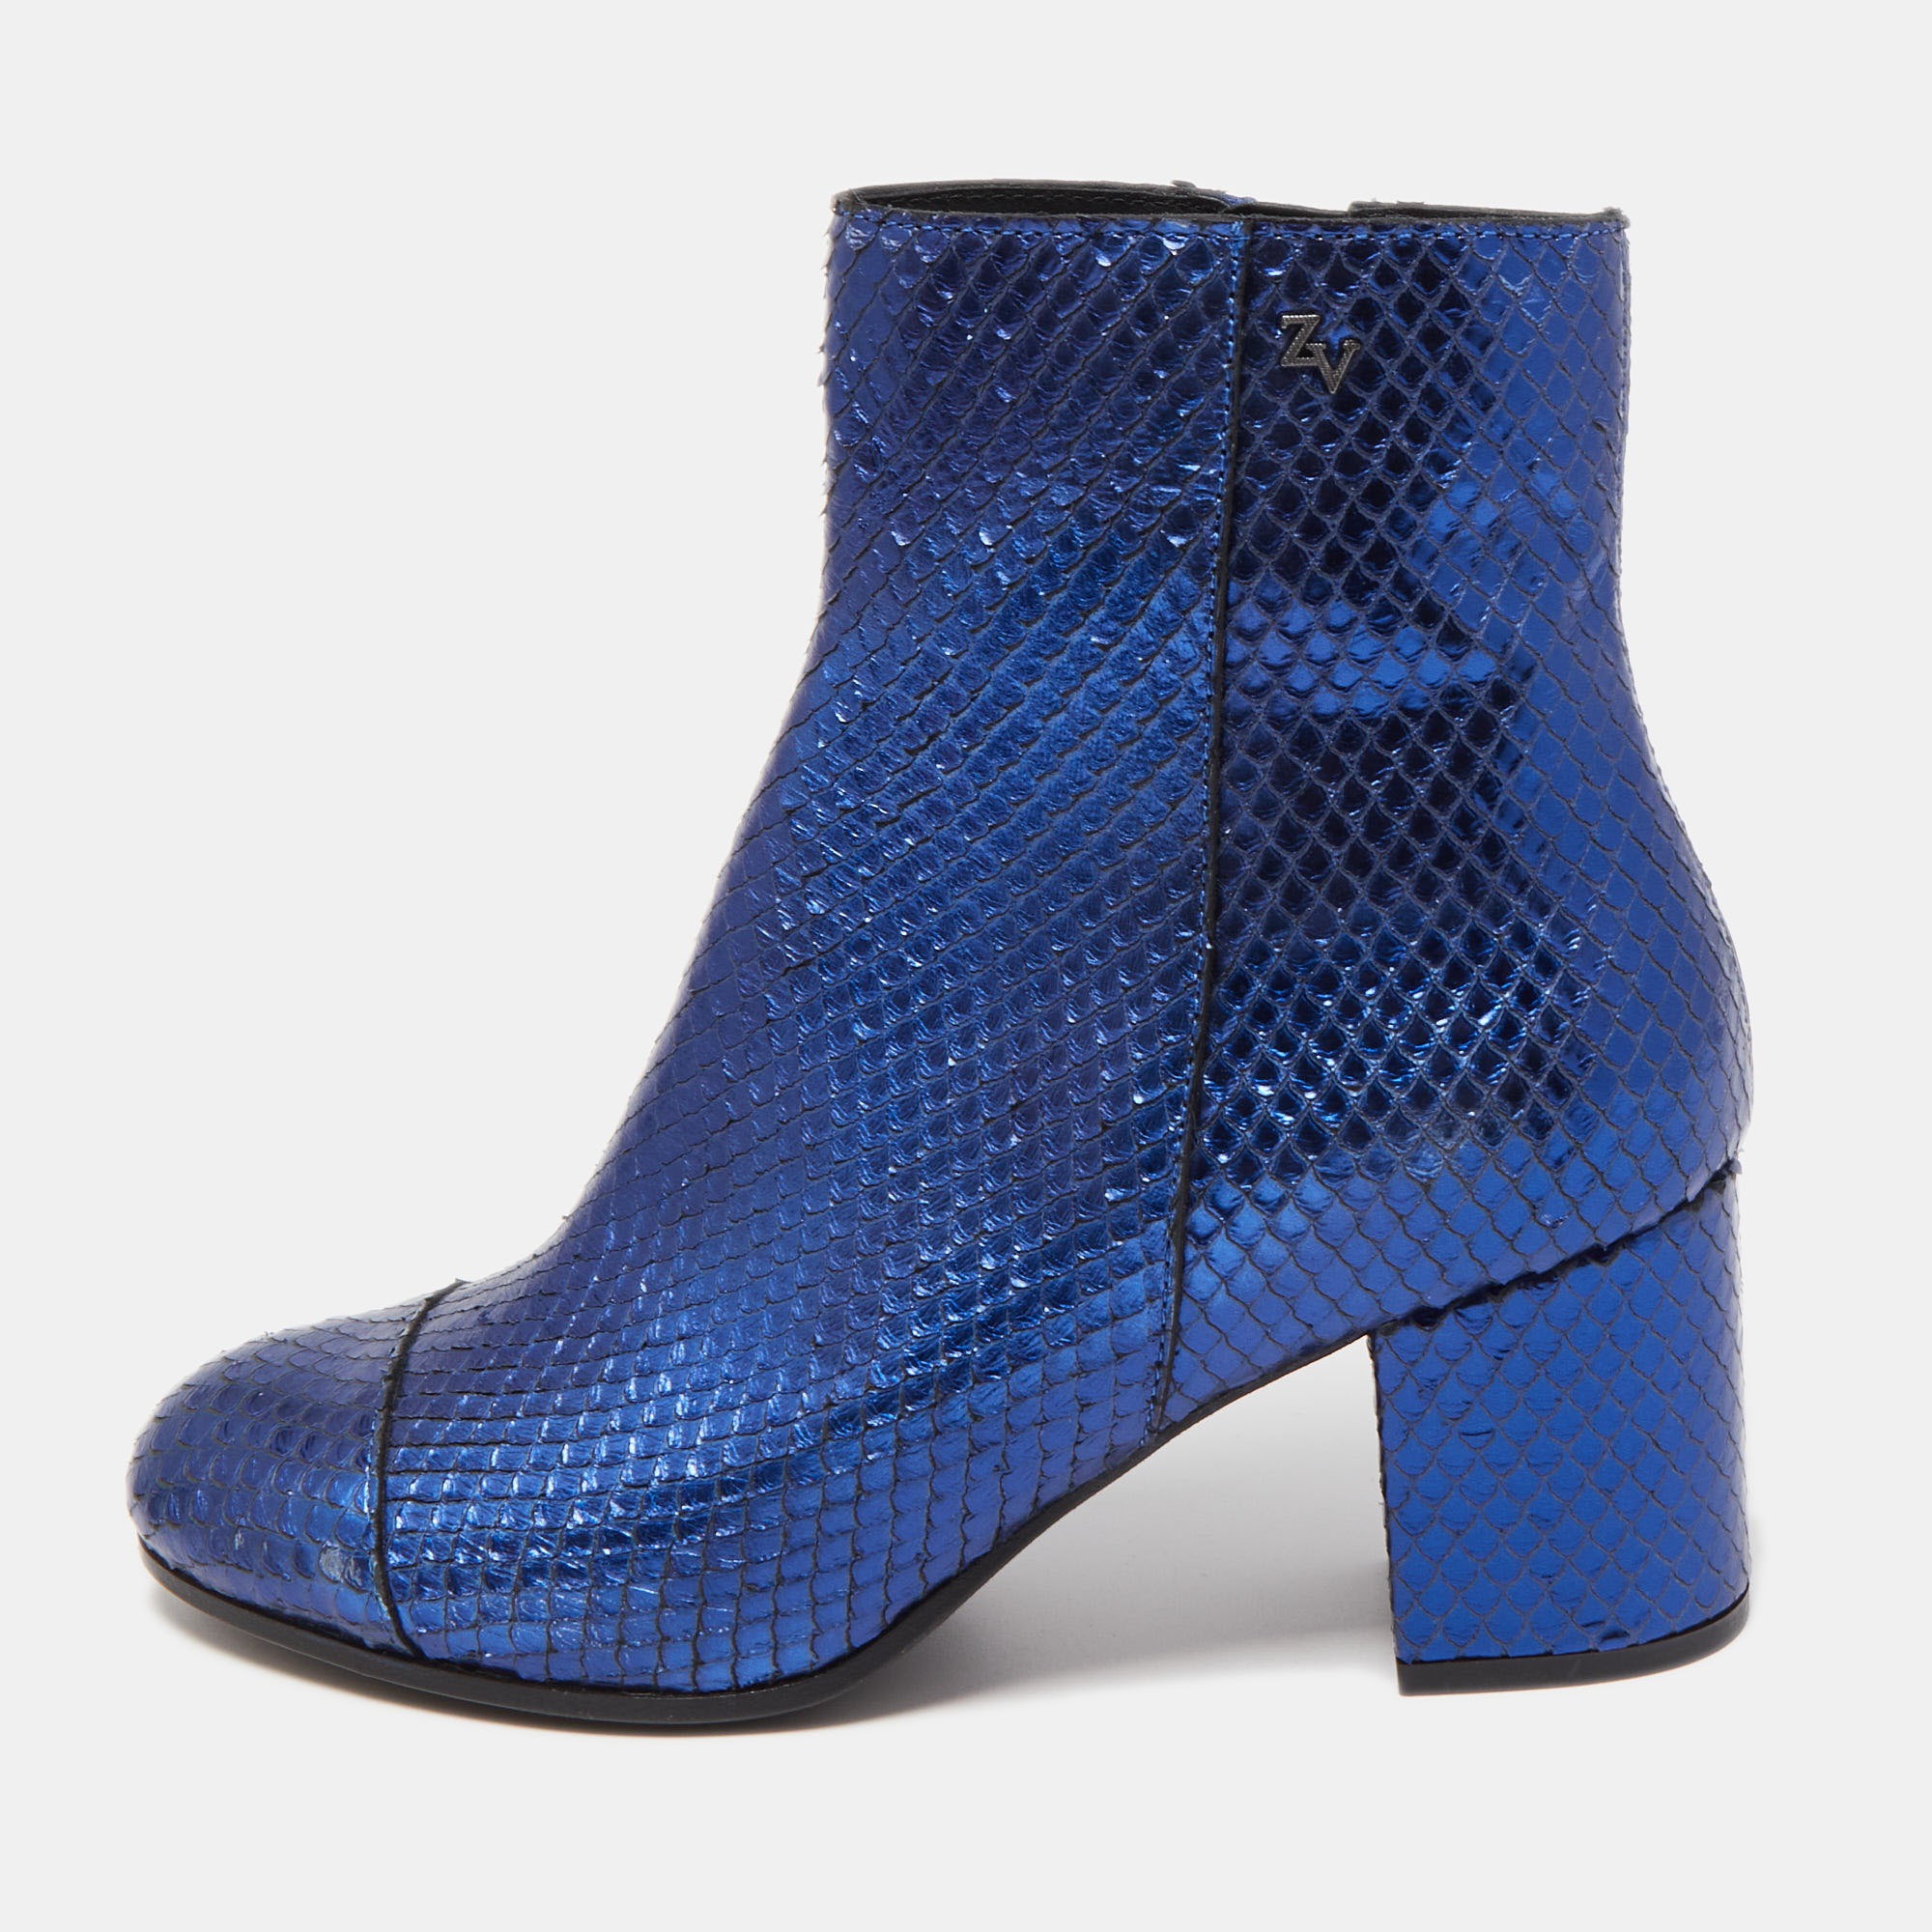 Zadig & voltaire blue python embossed leather block heel ankle booties size 36